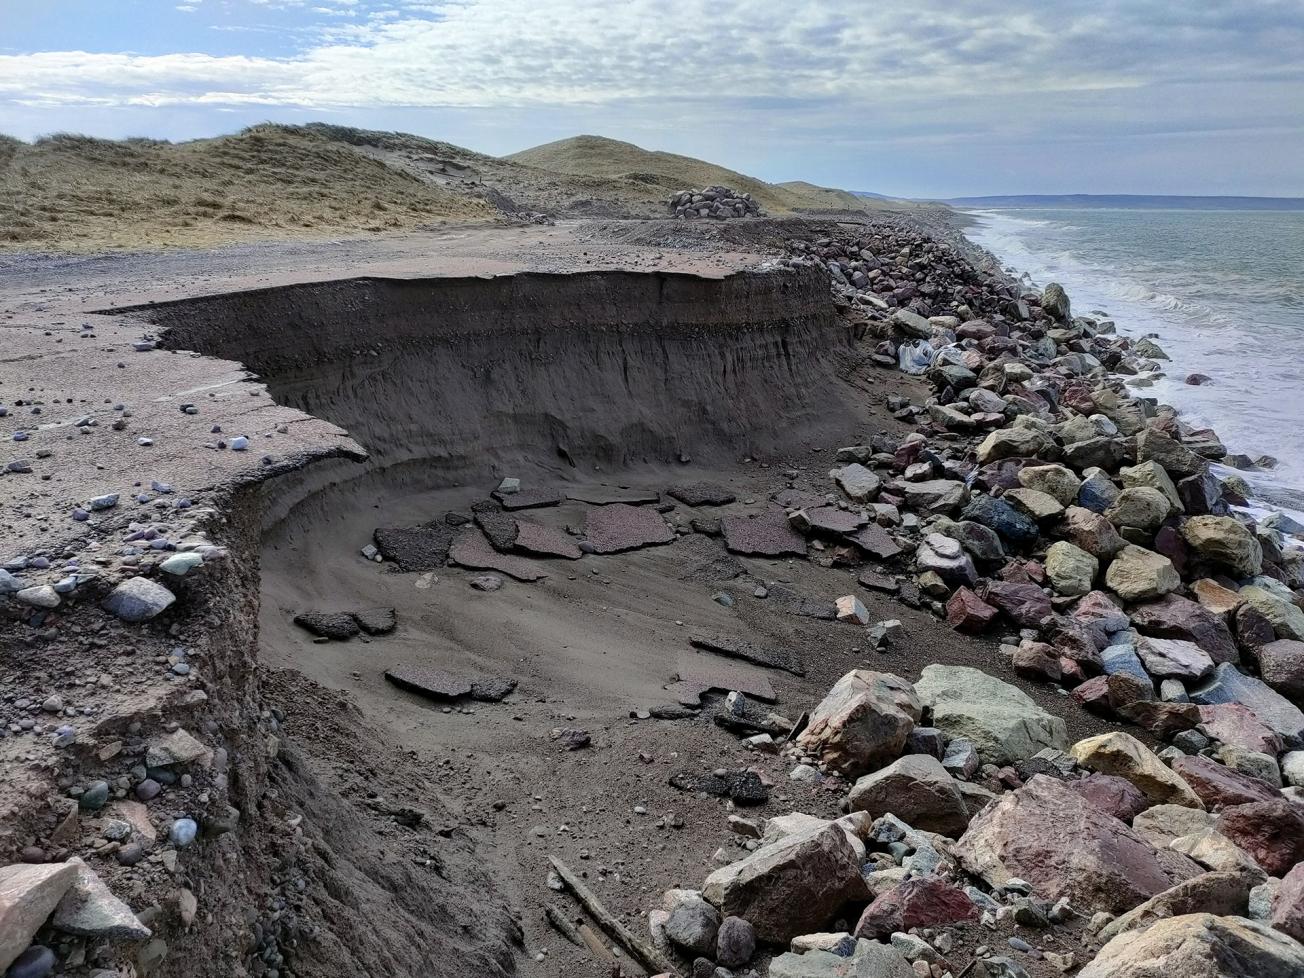 Erosion breach on the Miquelon-Langlade isthmus following the storms of February-March 2021 (KP16 Miquelon-Langlade isthmus, 2021)